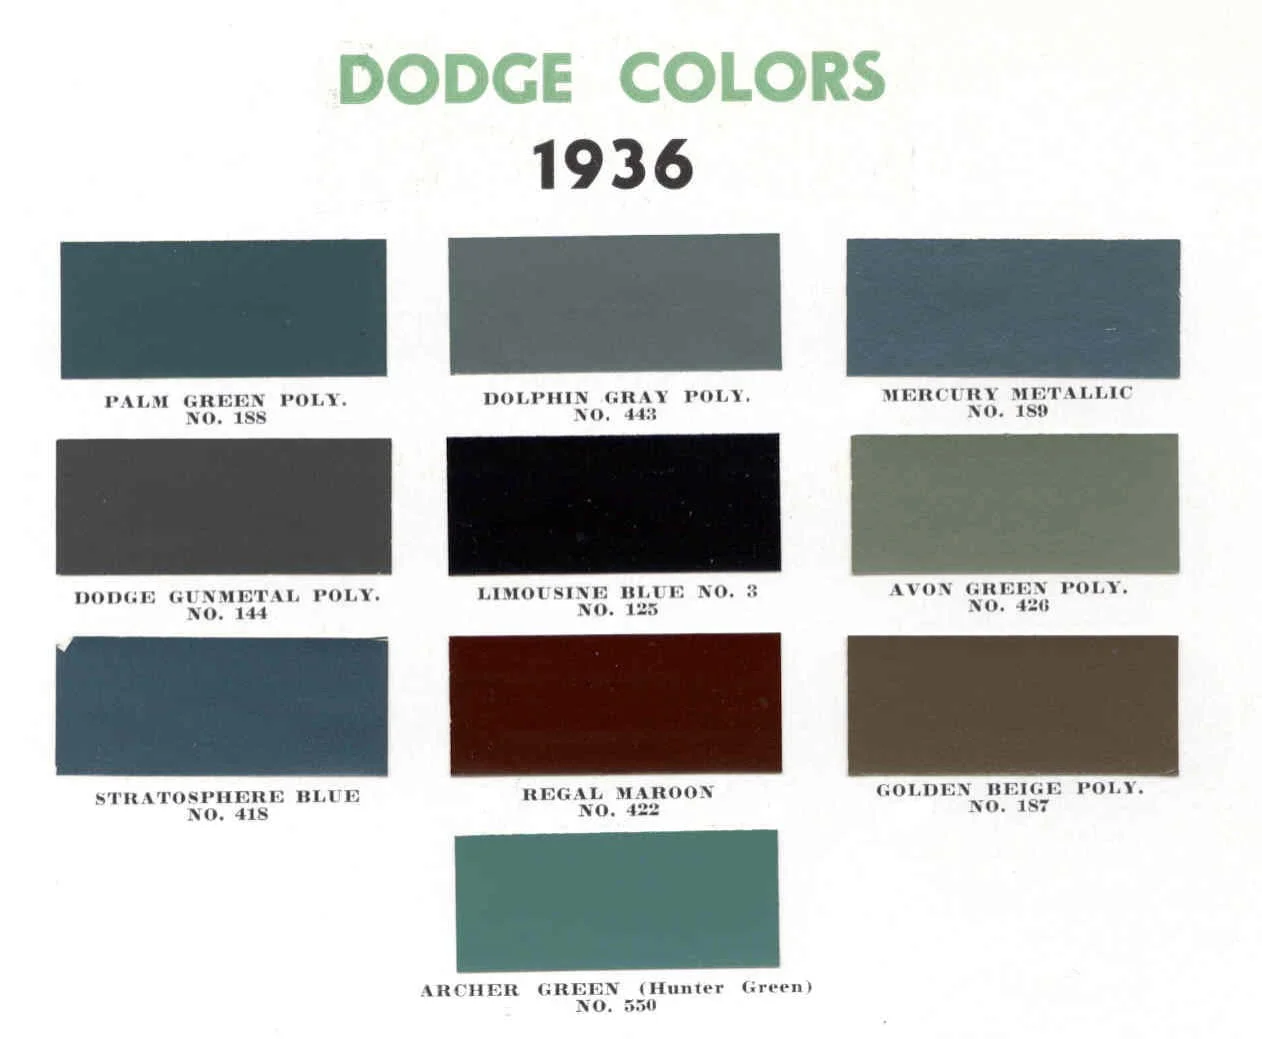 Summary Of Colors used on all Dodge Vehicles in 1936